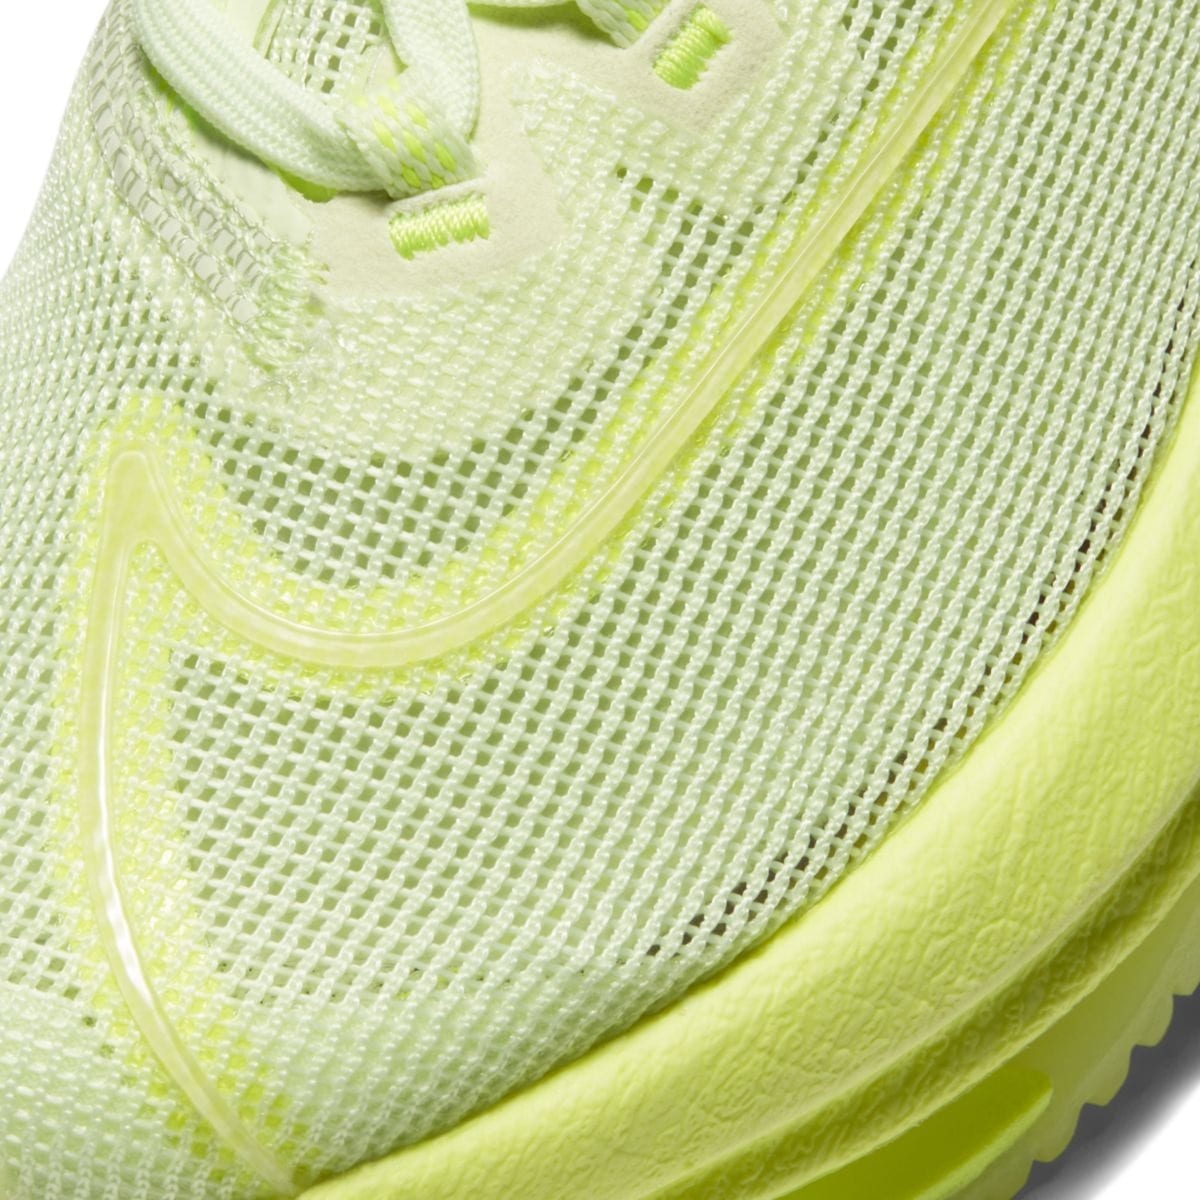 Nike Zoom Double Stacked Barely Volt CI0804-700 7